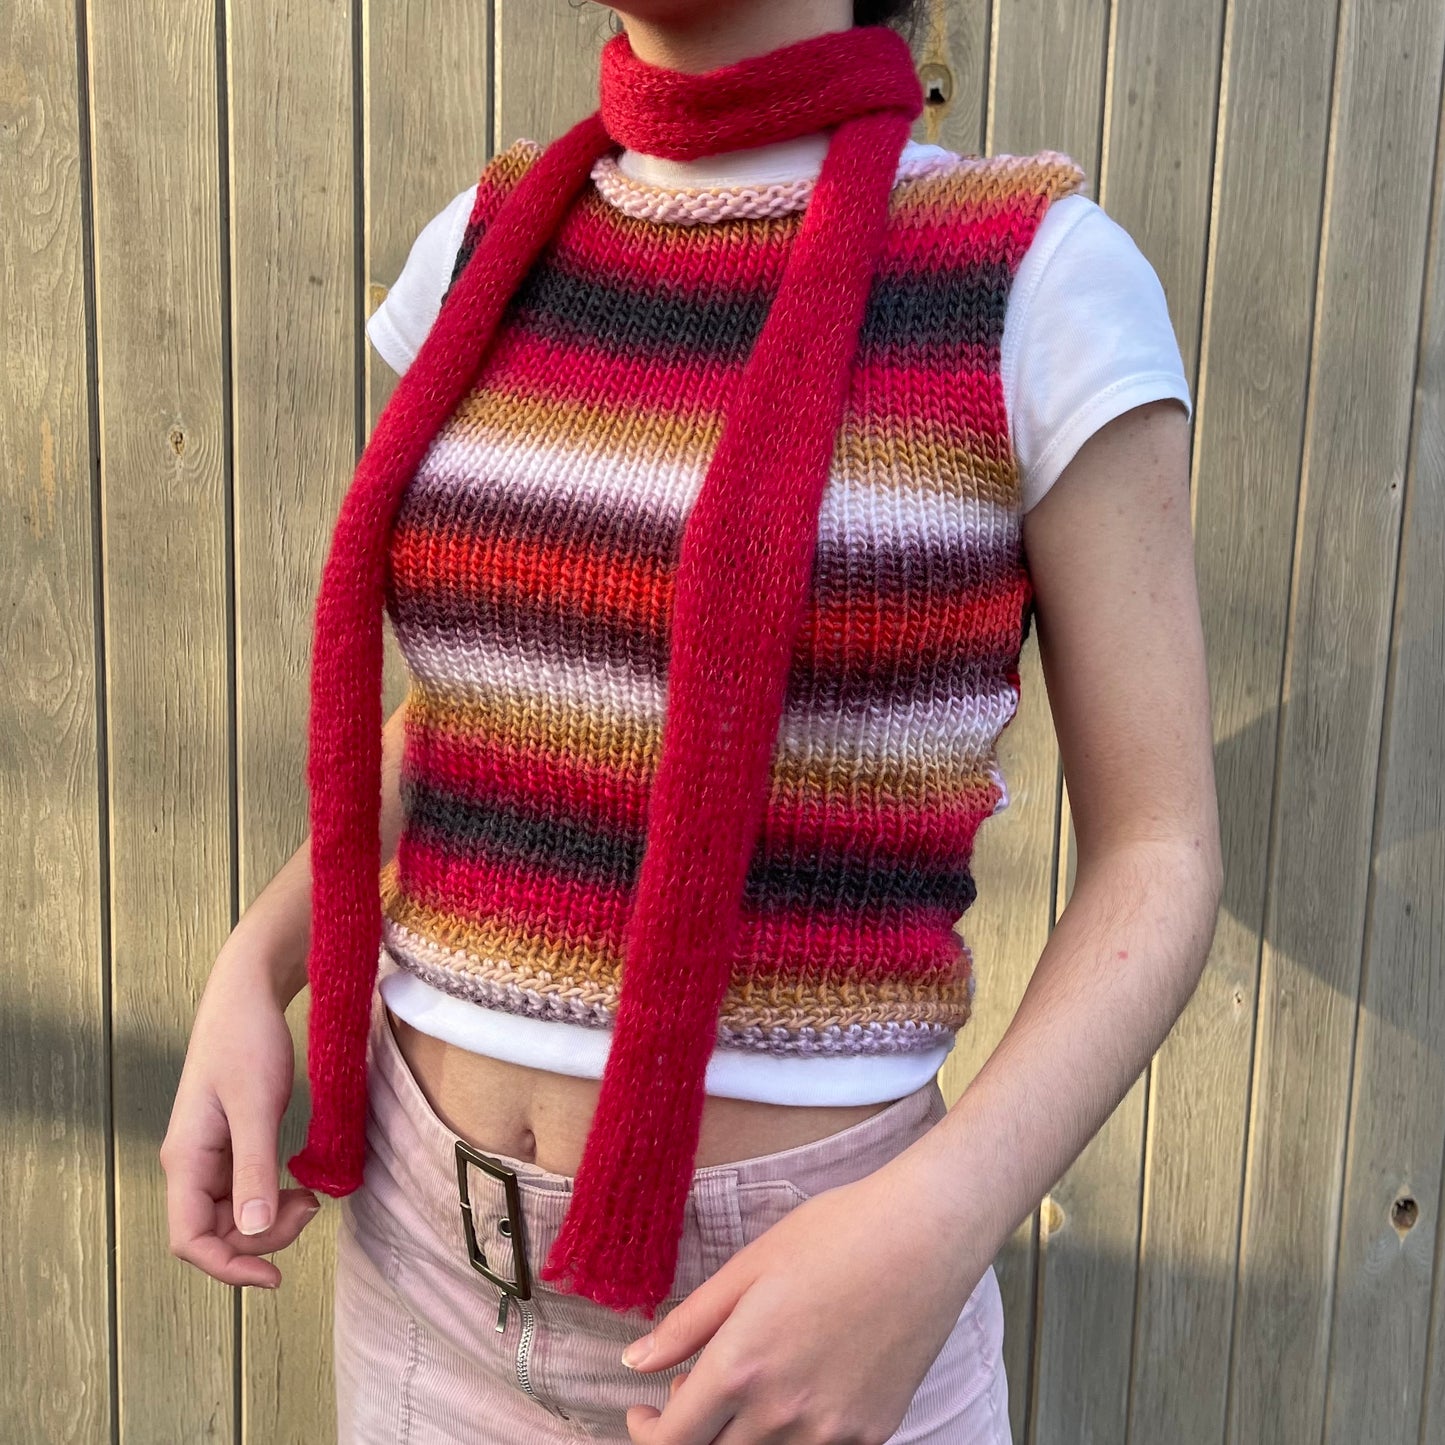 The Fusion Vest - handmade knitted sweater vest